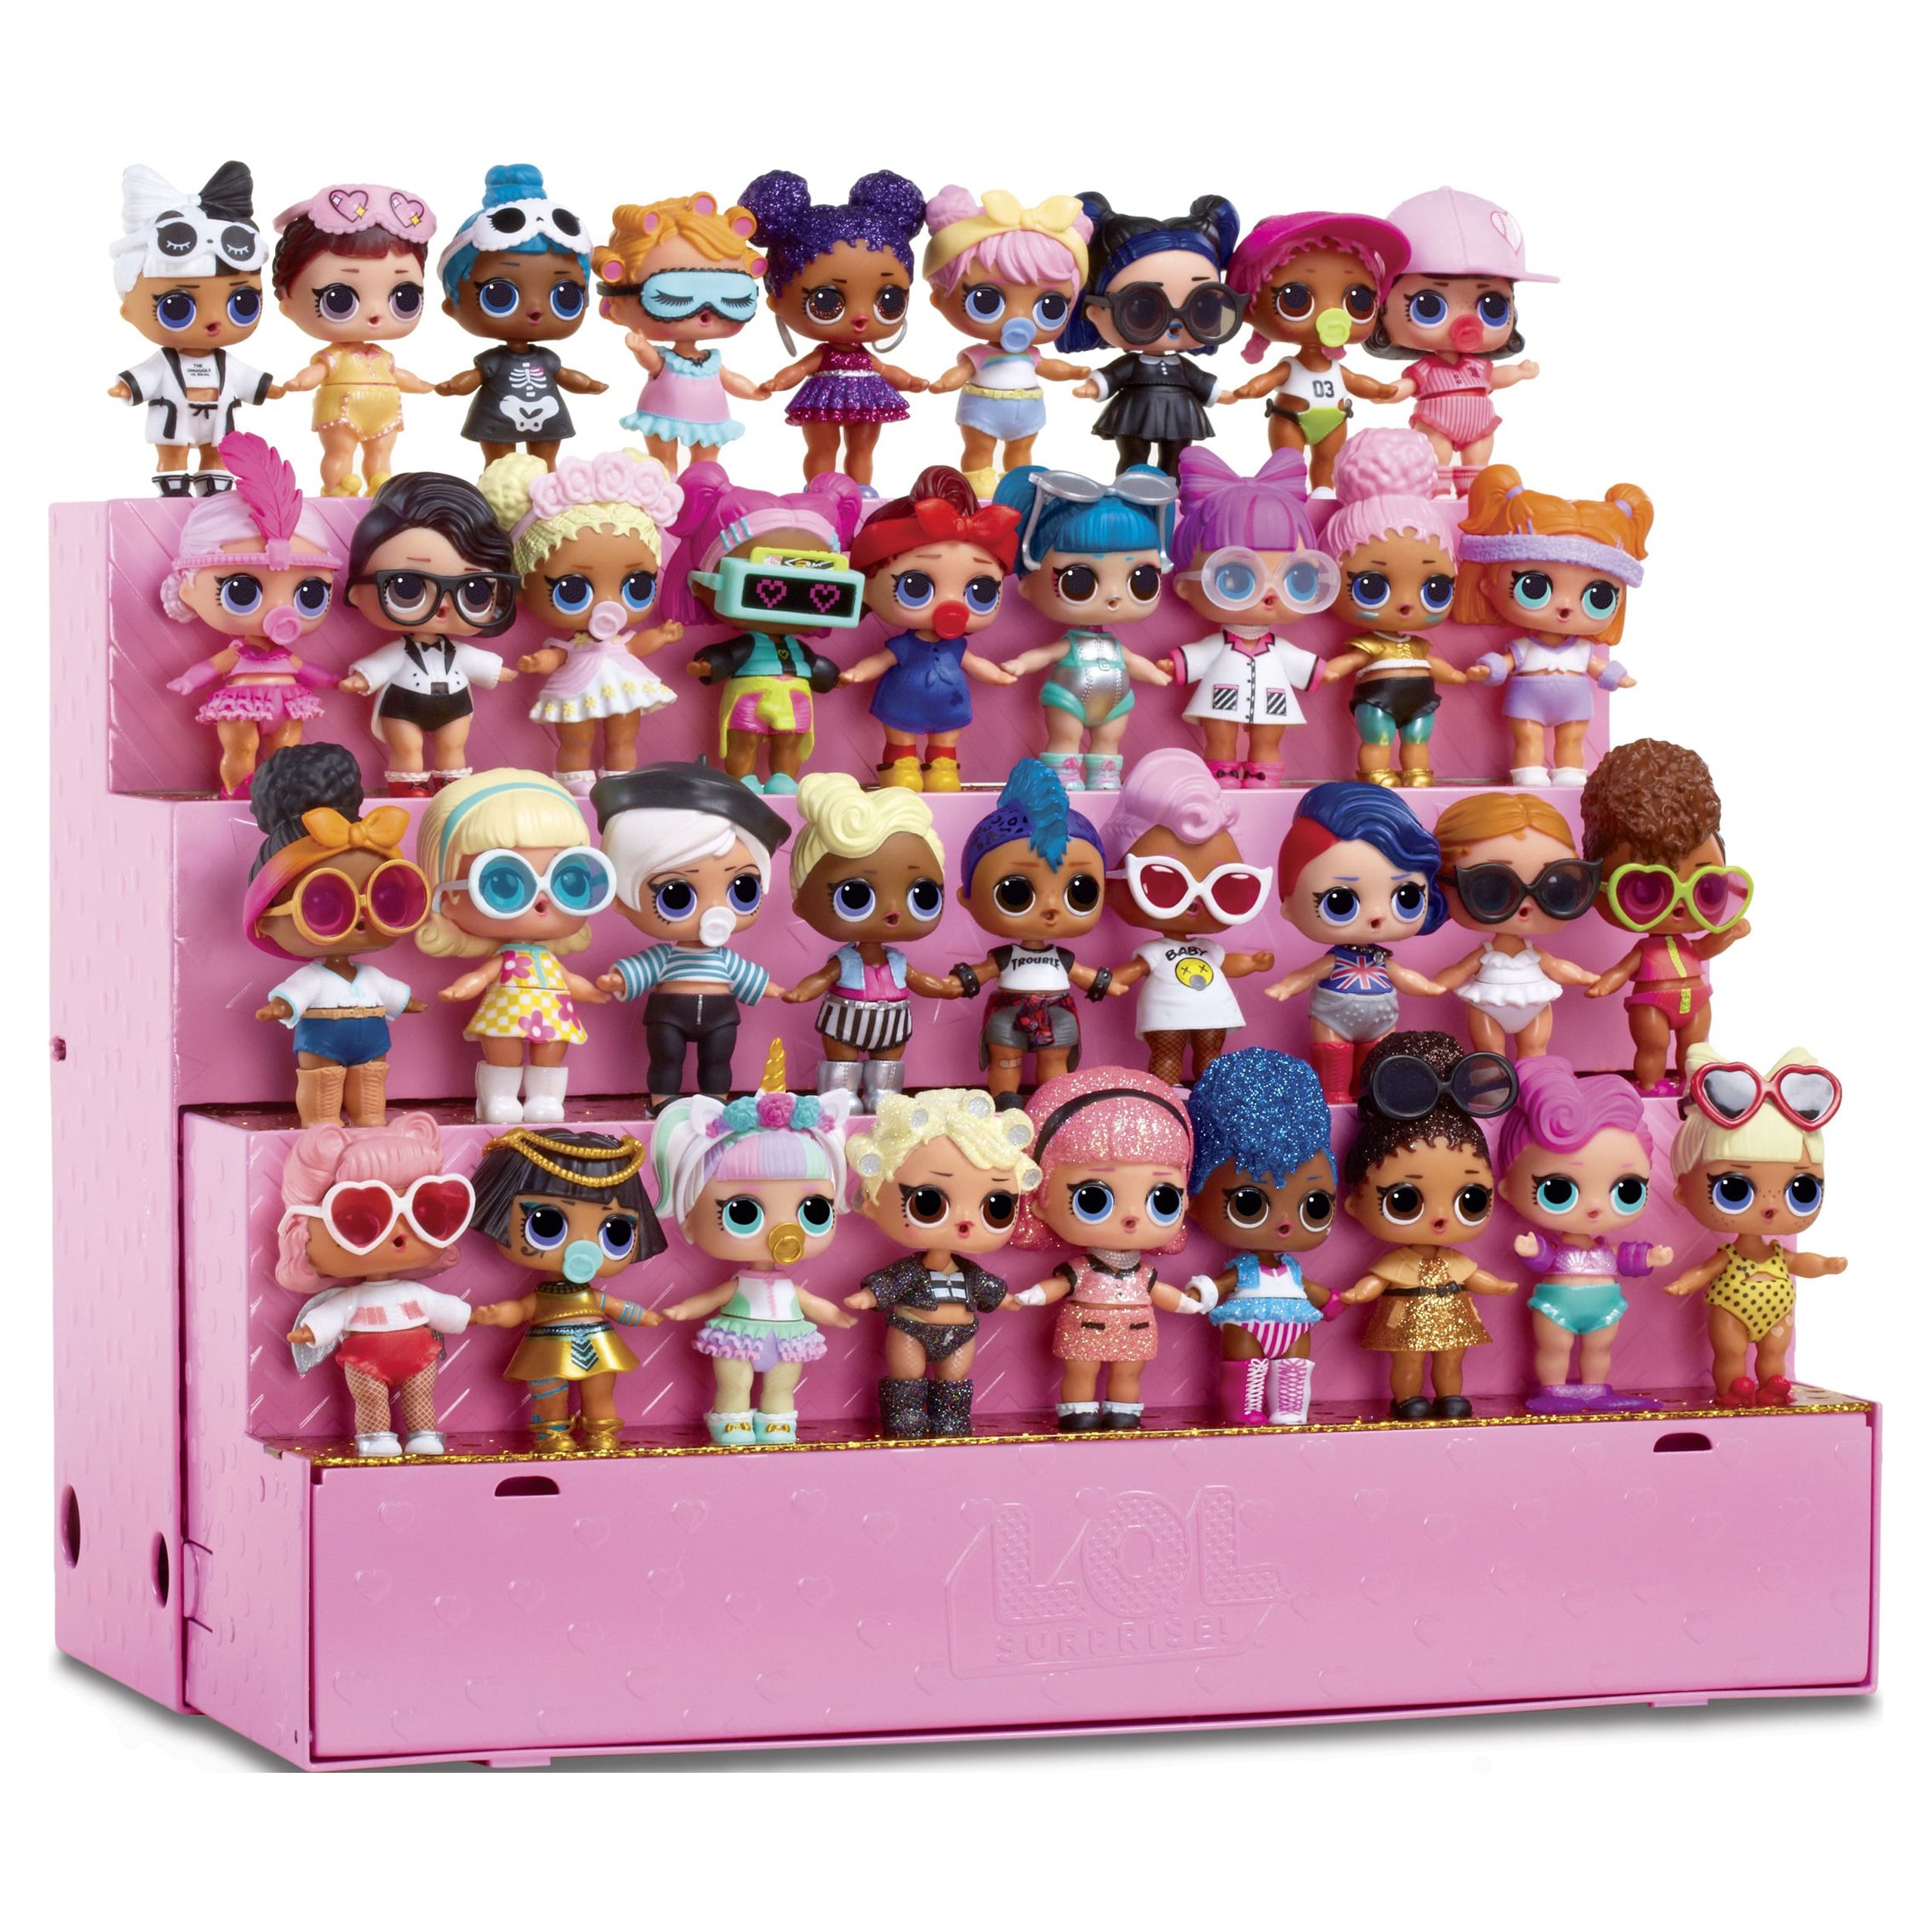 LOL Surprise 3-in-1 Pop-Up Store With Exclusive Doll & Carrying Case - Toy for Girls Ages 4 5 6+ - image 1 of 6